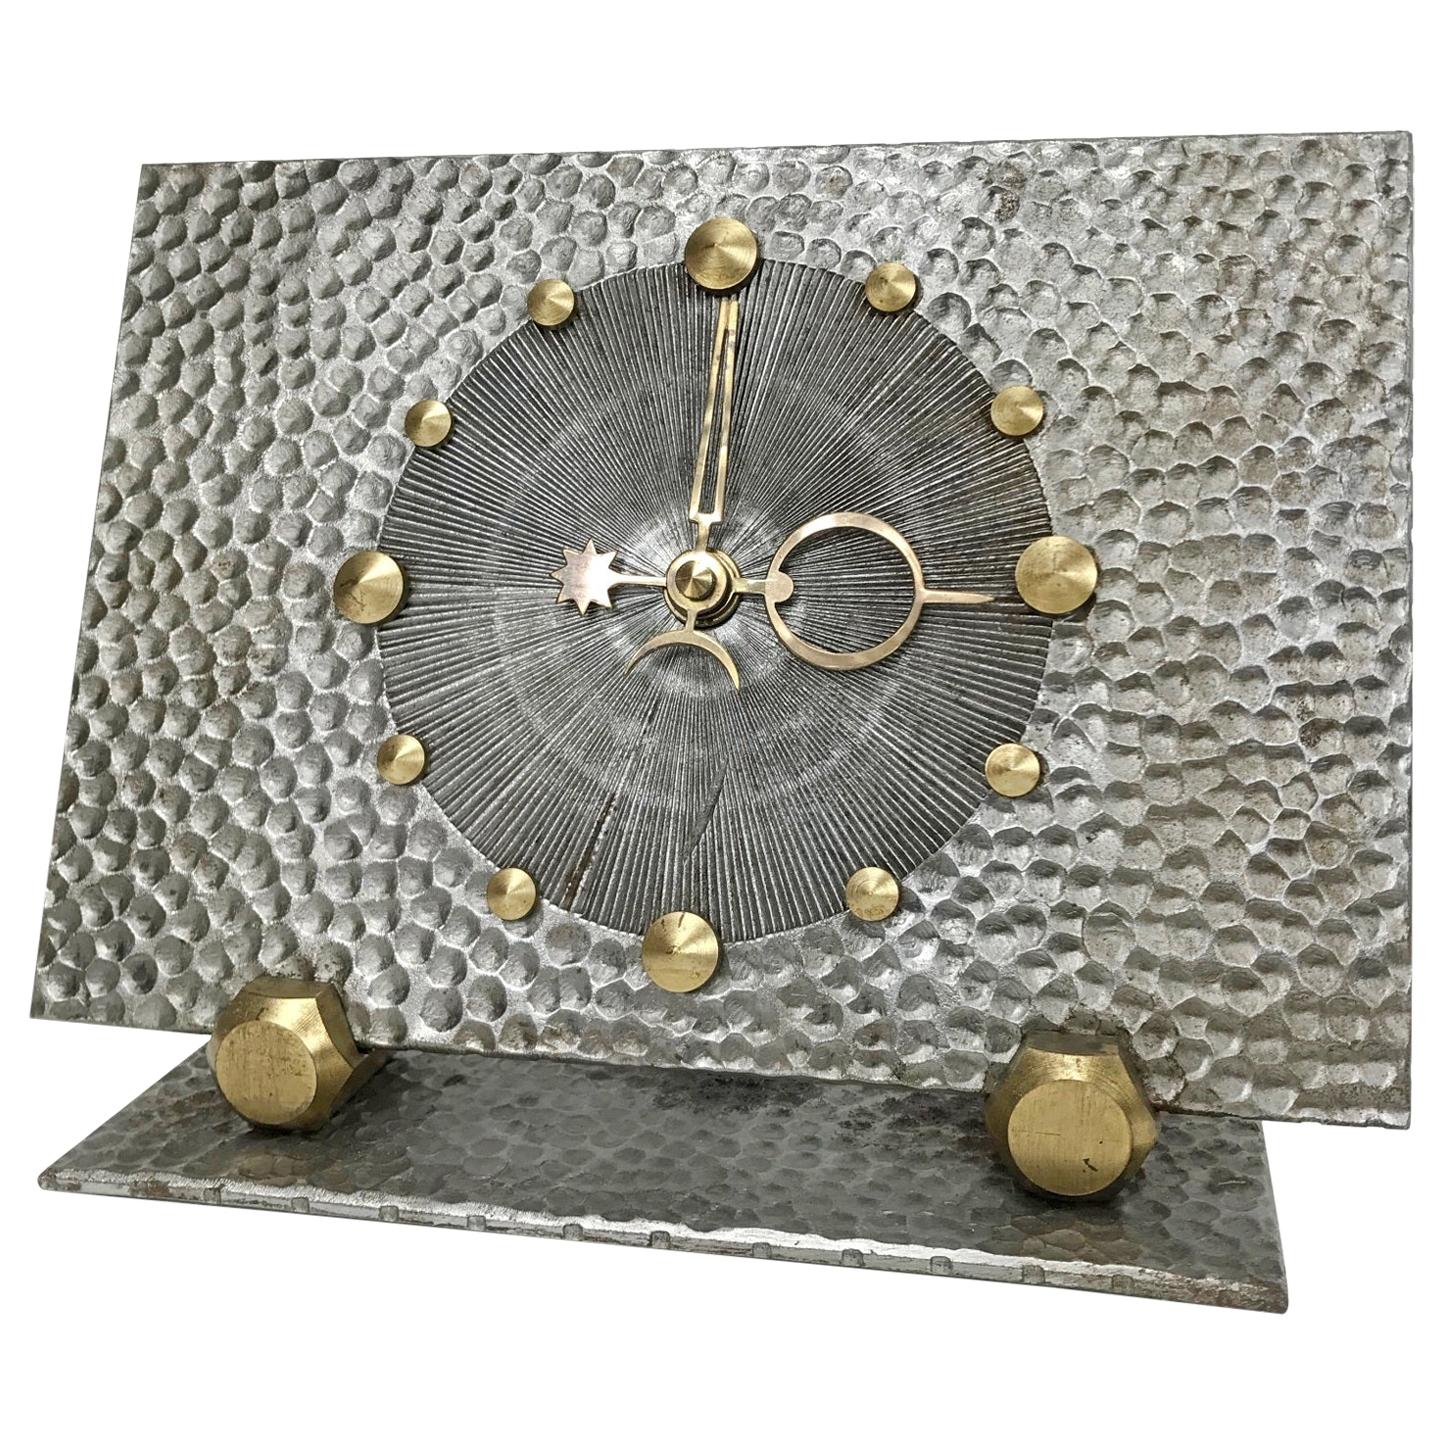 Unique Midcentury Brutalist Brass and Steel Table Clock, 1950s, Germany